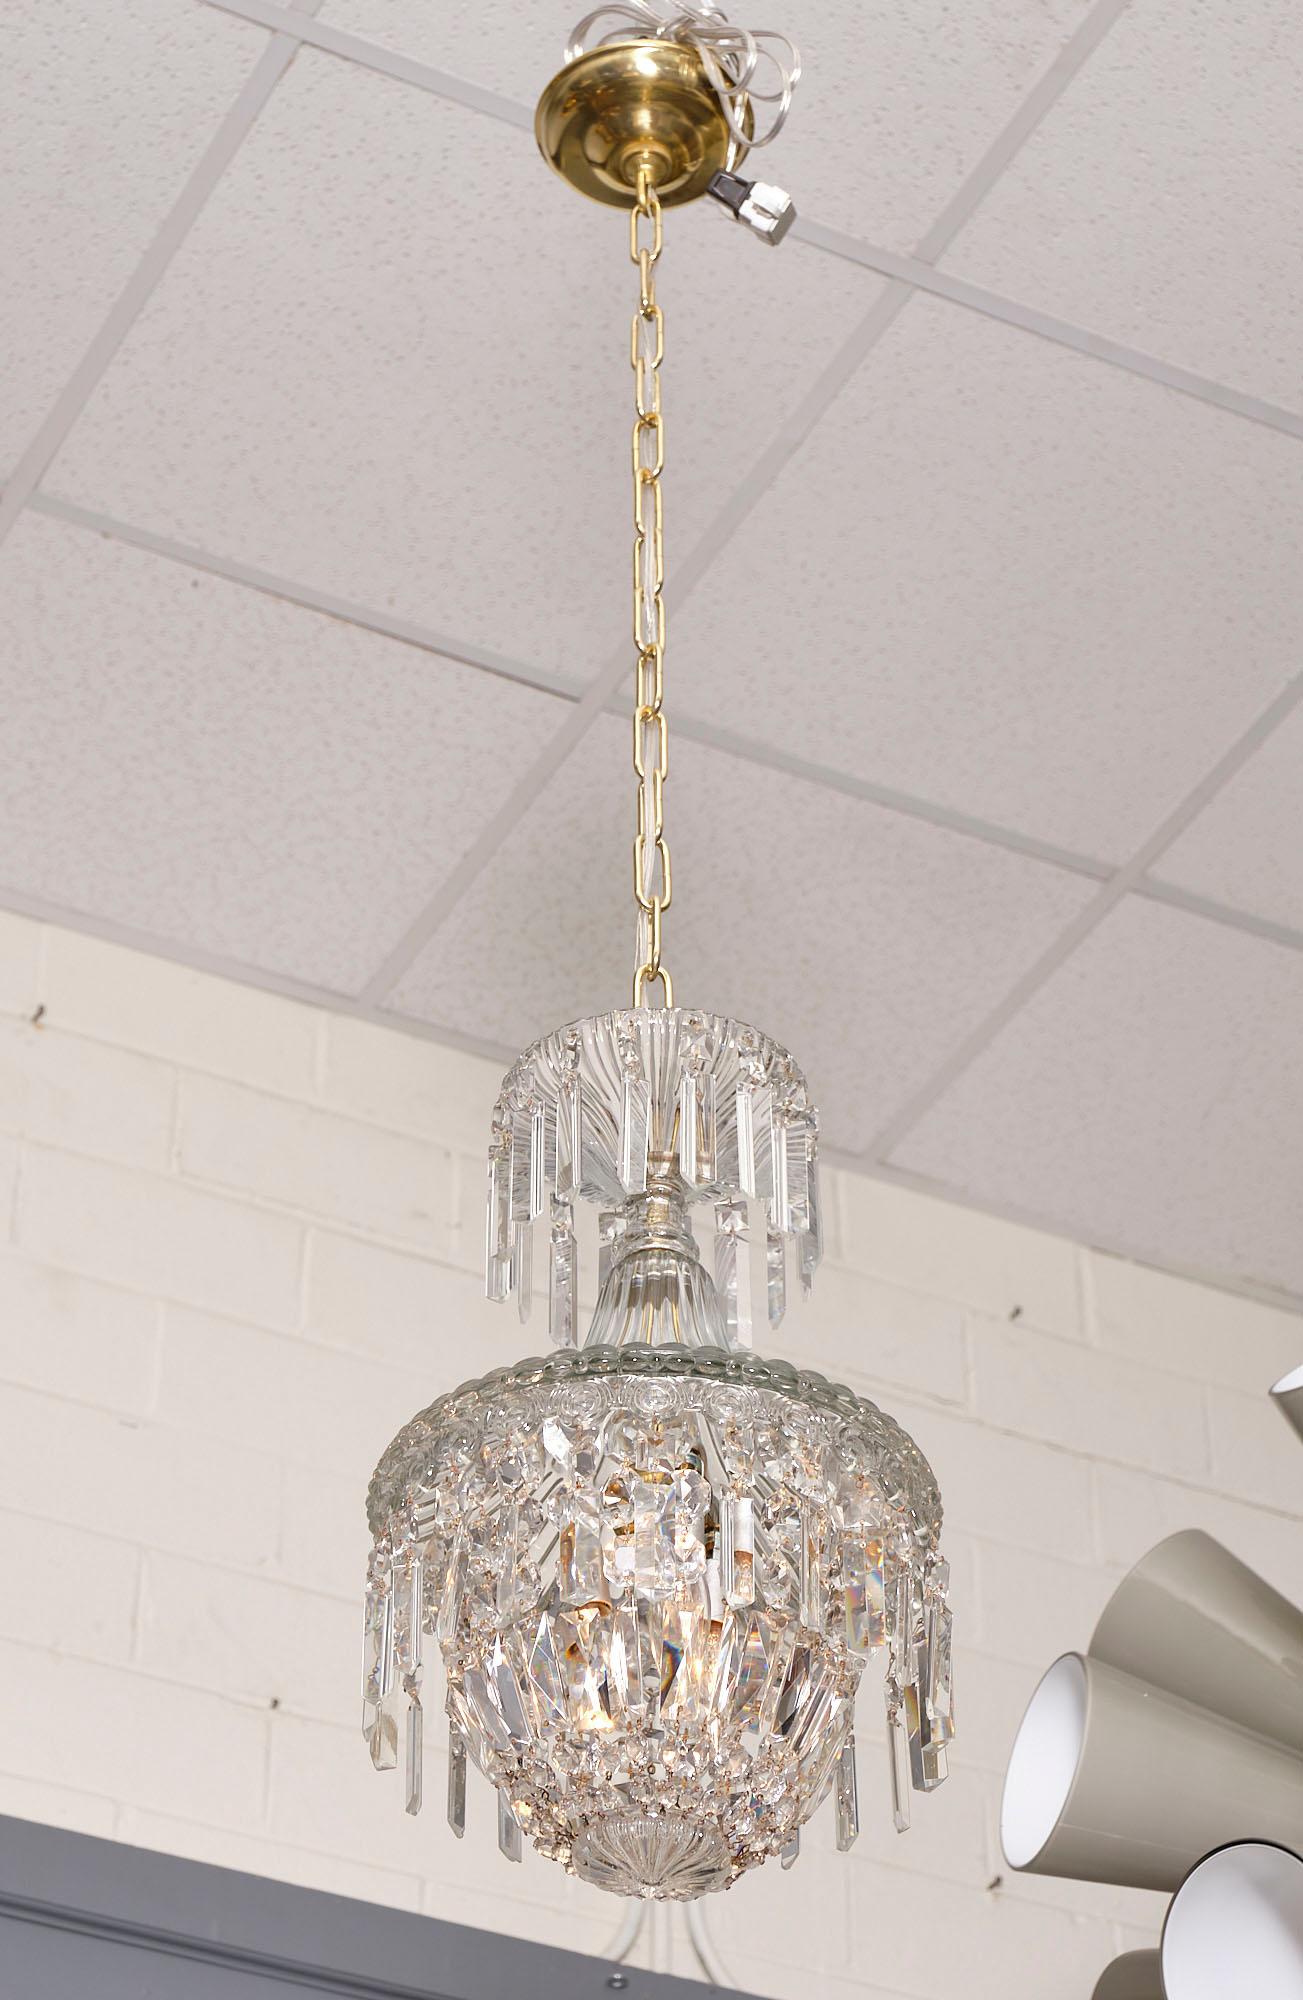 French crystal antique chandelier in the manner of Baccarat with cut crystal pendants around a crystal bell. This piece has been newly wired to fit US standards.